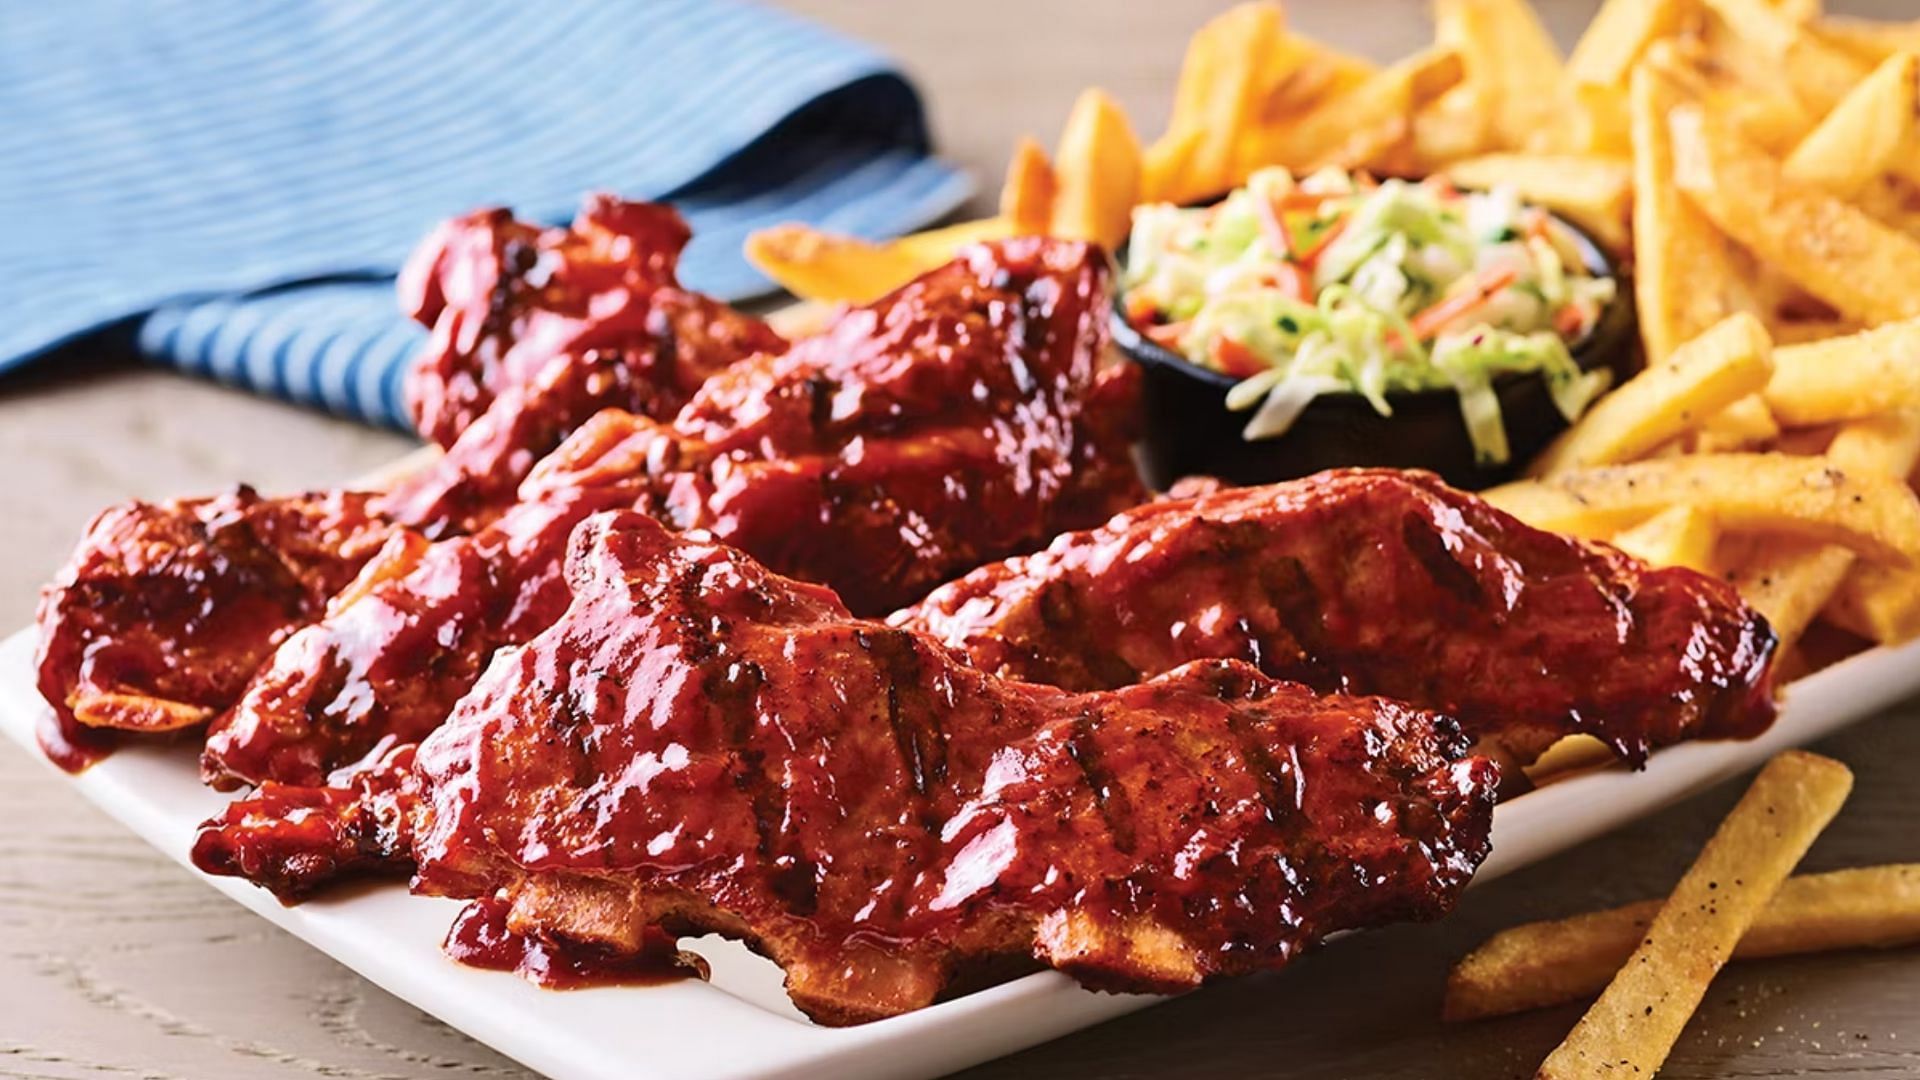 Honey BBQ or sweet Asian Chile sauce sauce coated All You Can Eat Riblets (Image via Applebee&rsquo;s)